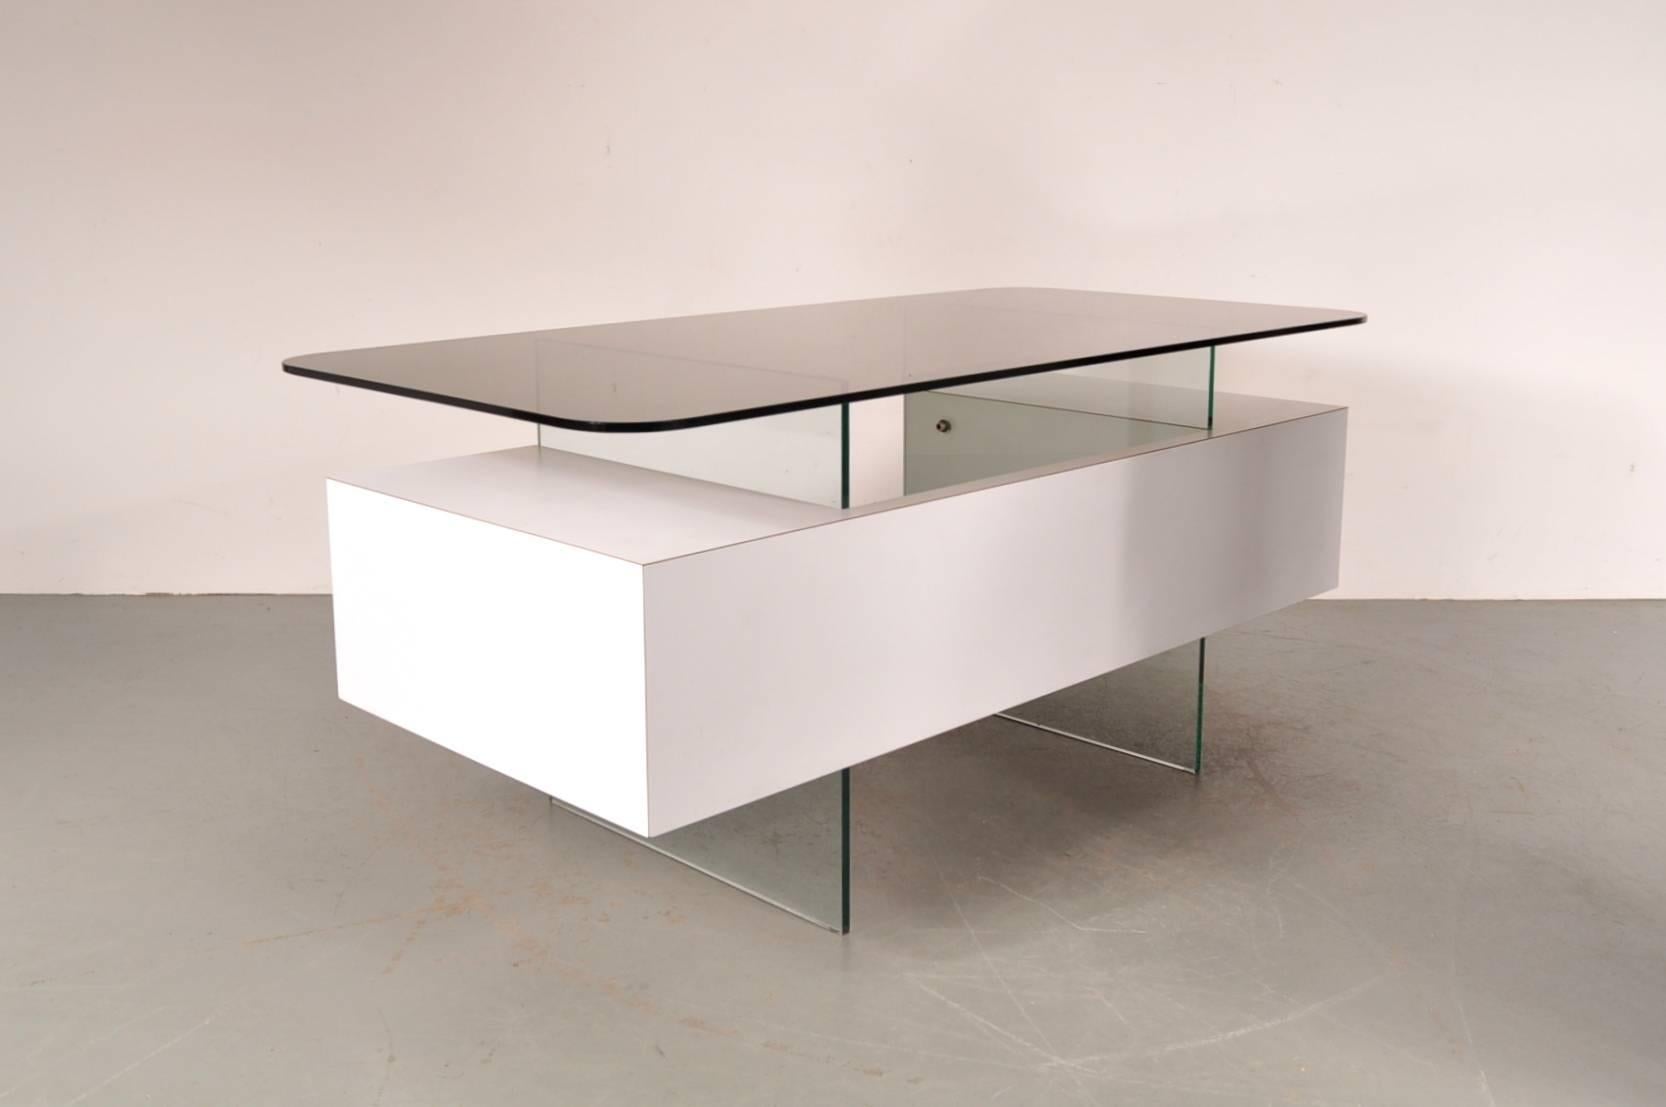 Luxurious executive desk designed by Xavier Marbeau, manufactured in France, circa 1960.

This stunning rare piece that stands out thanks to it's beautiful use of materials. The base is made of glass and wood with a smoke glass top. It creates a